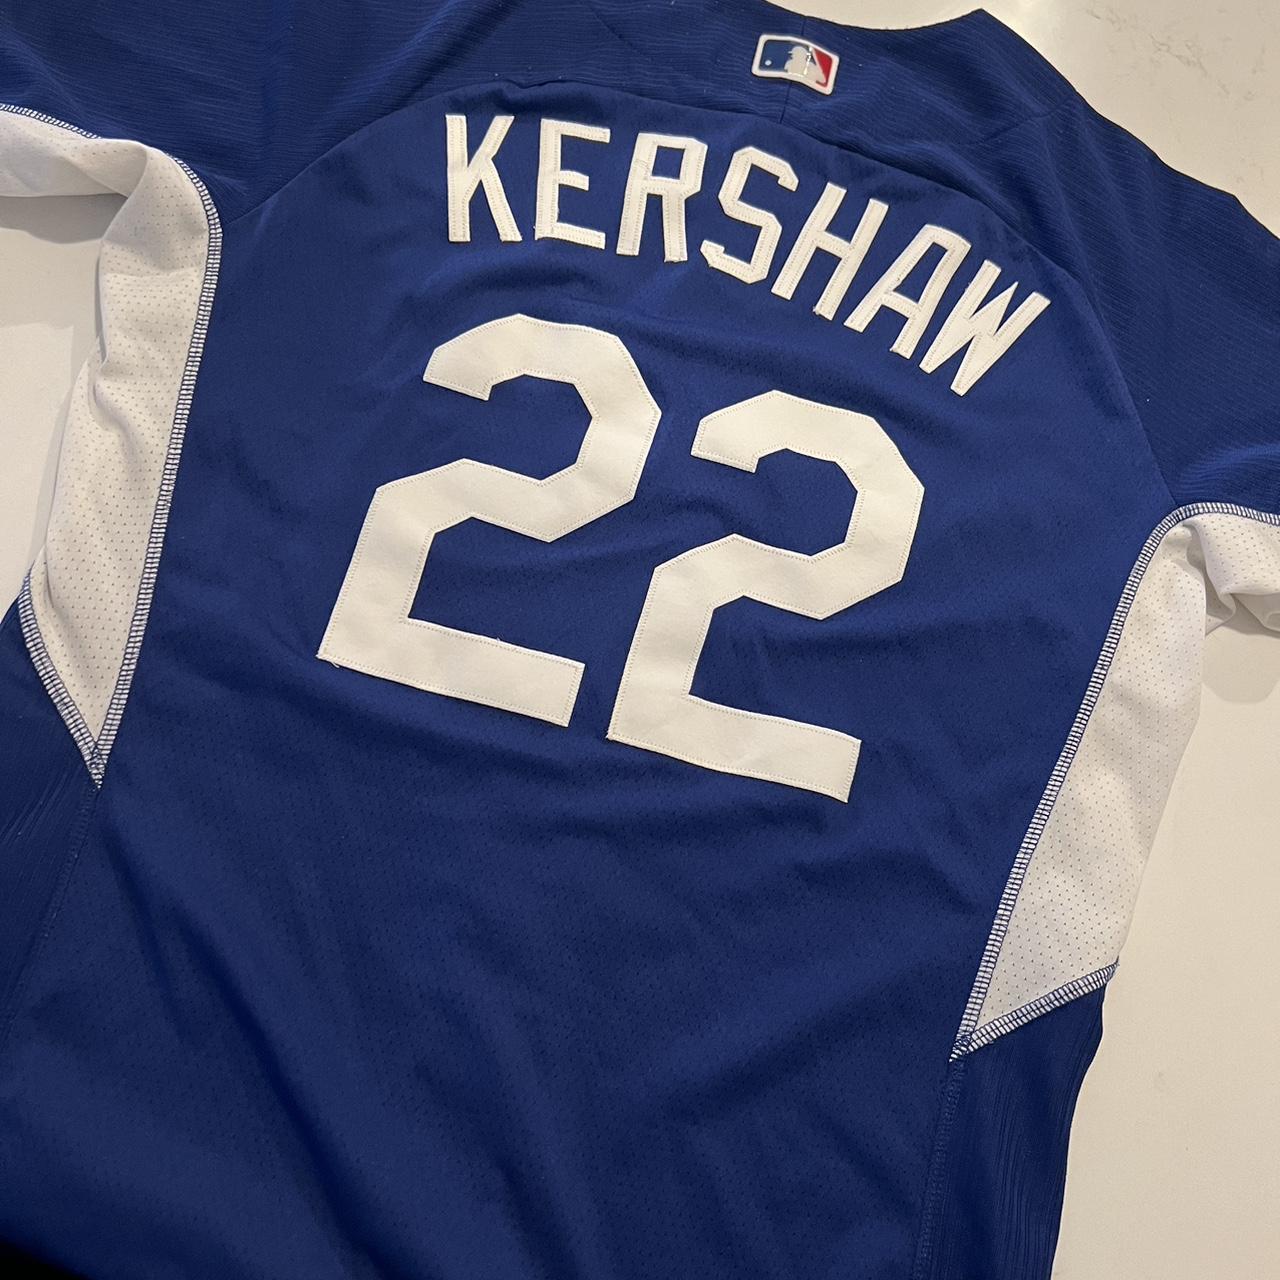 majestic dodgers kershaw jersey size YOUTH large - Depop